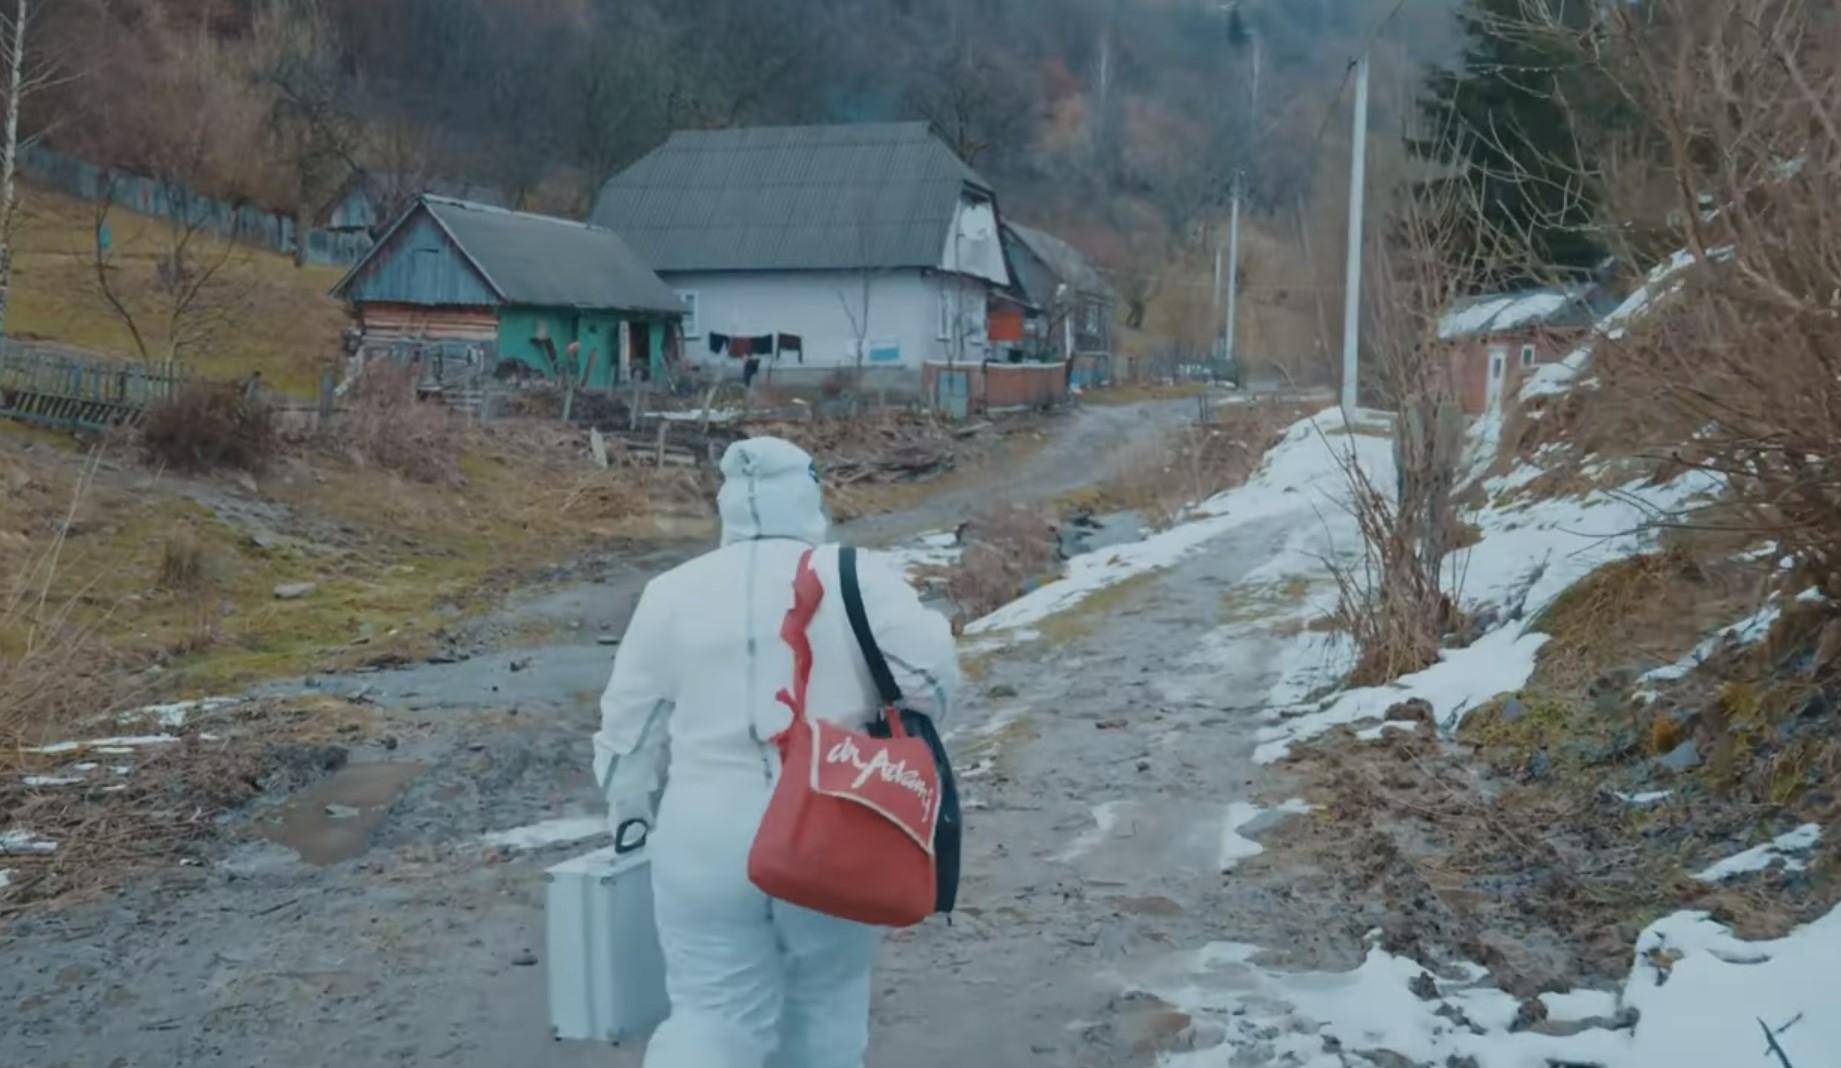 "Mountains and heaven in between". A documentary about the everyday life of an "ambulance" in Transcarpathia was released online on Takflix